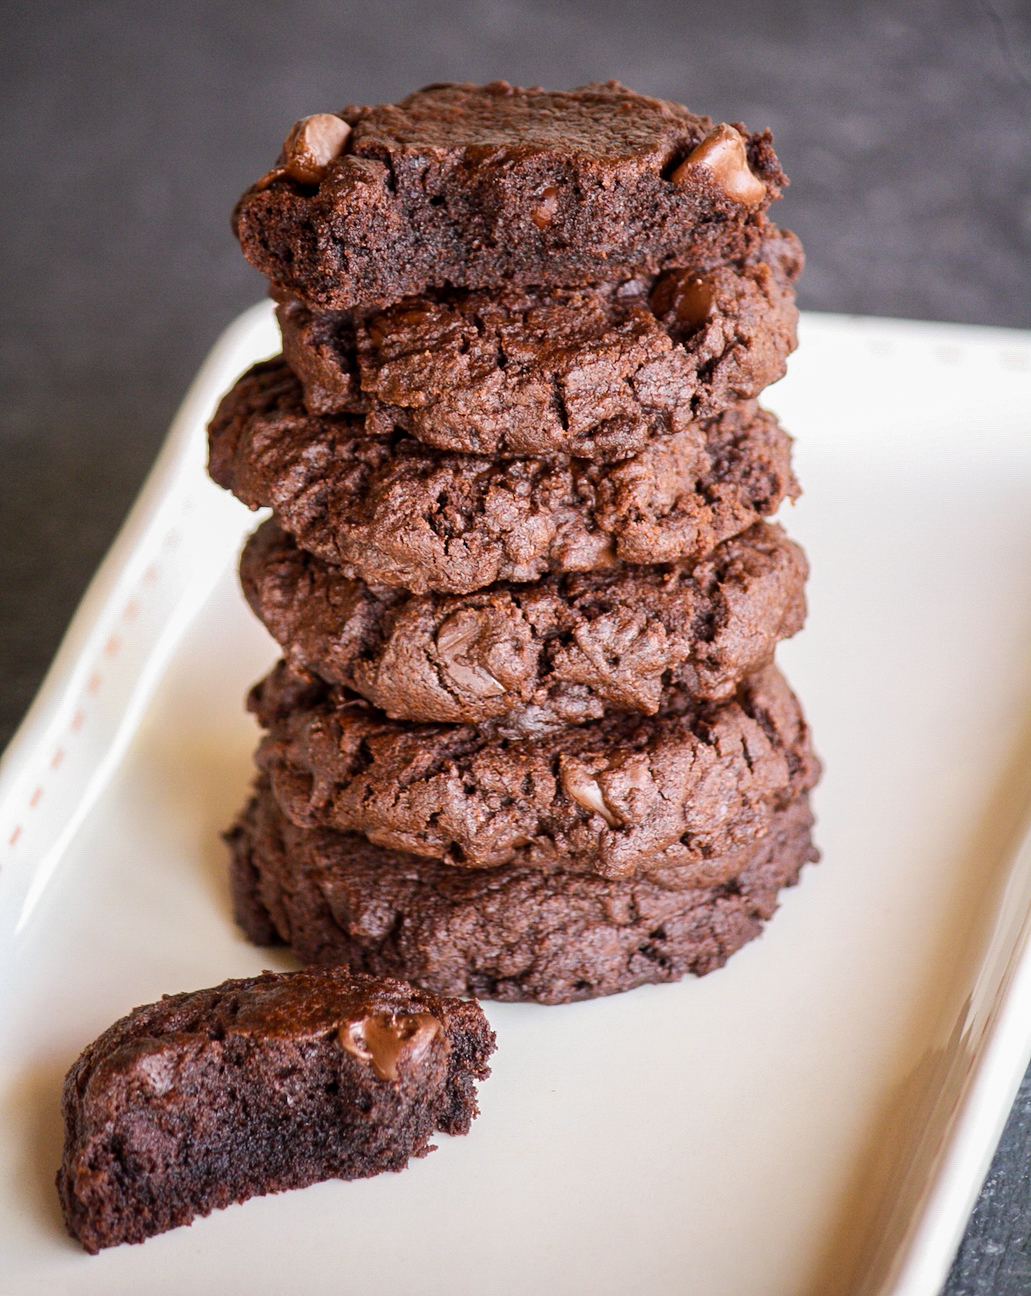 Rich, fudgy triple chocolate cookies with crisp edges and soft centers